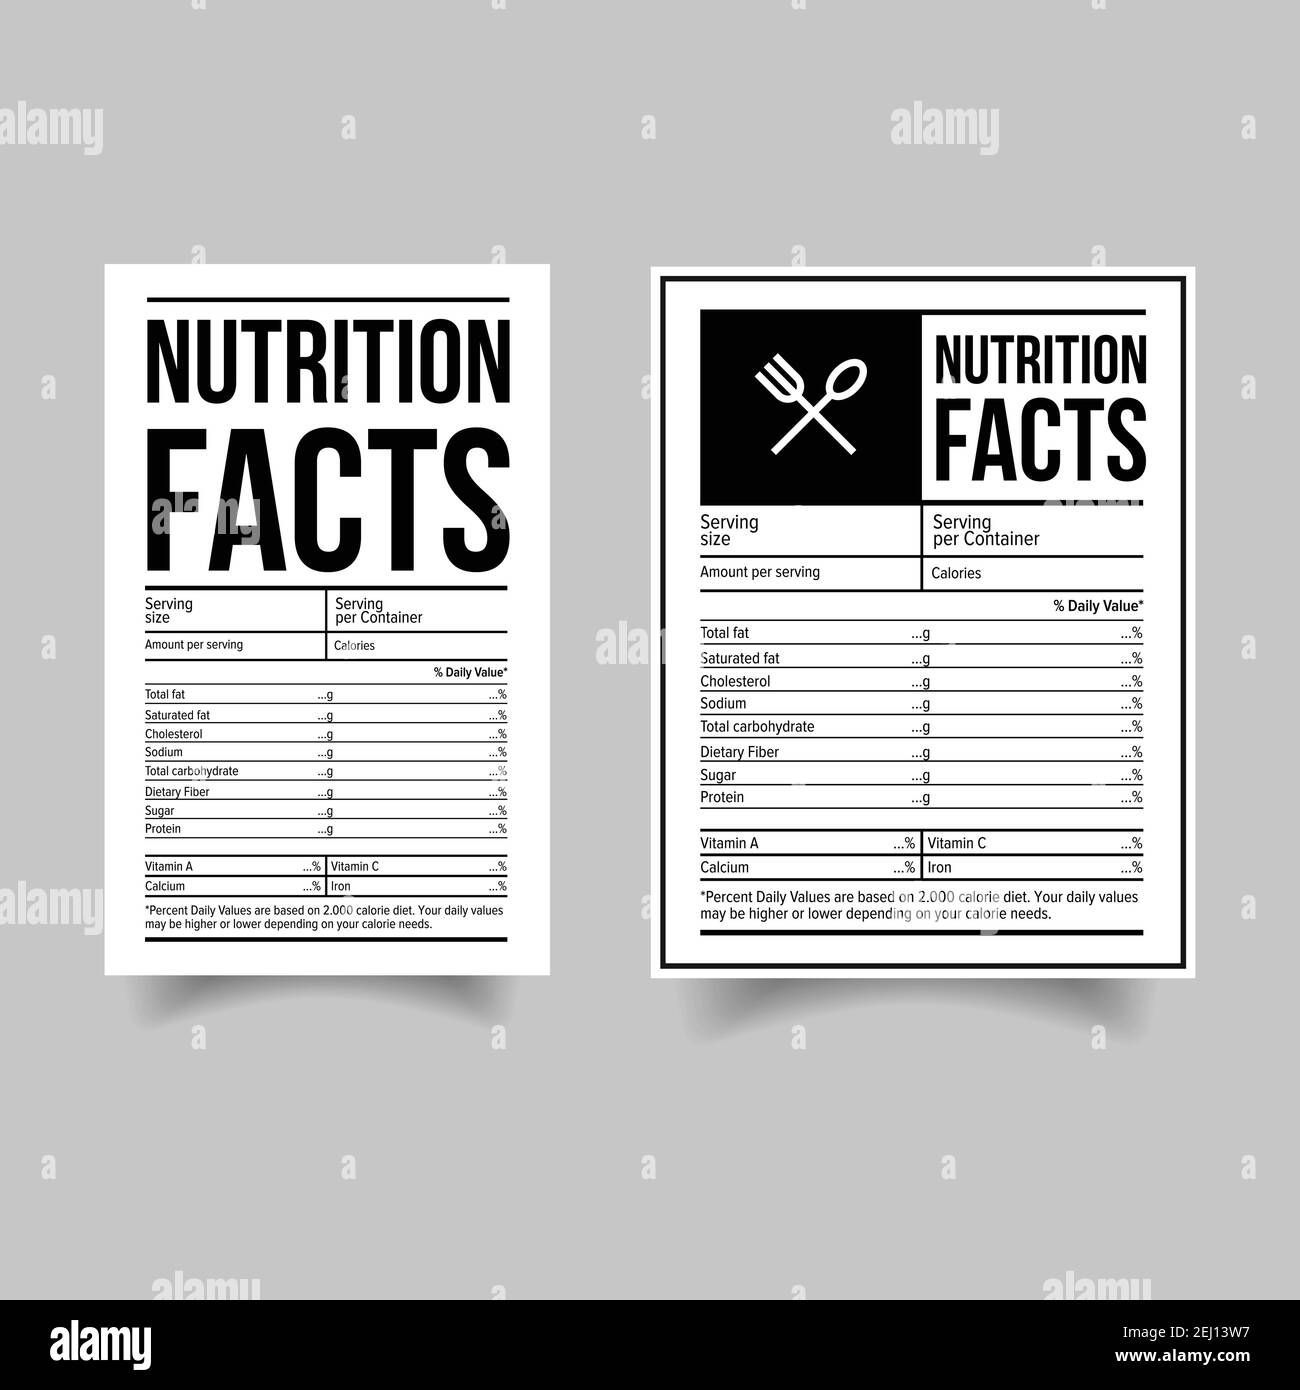 Nutrition Facts label set Stock Vector